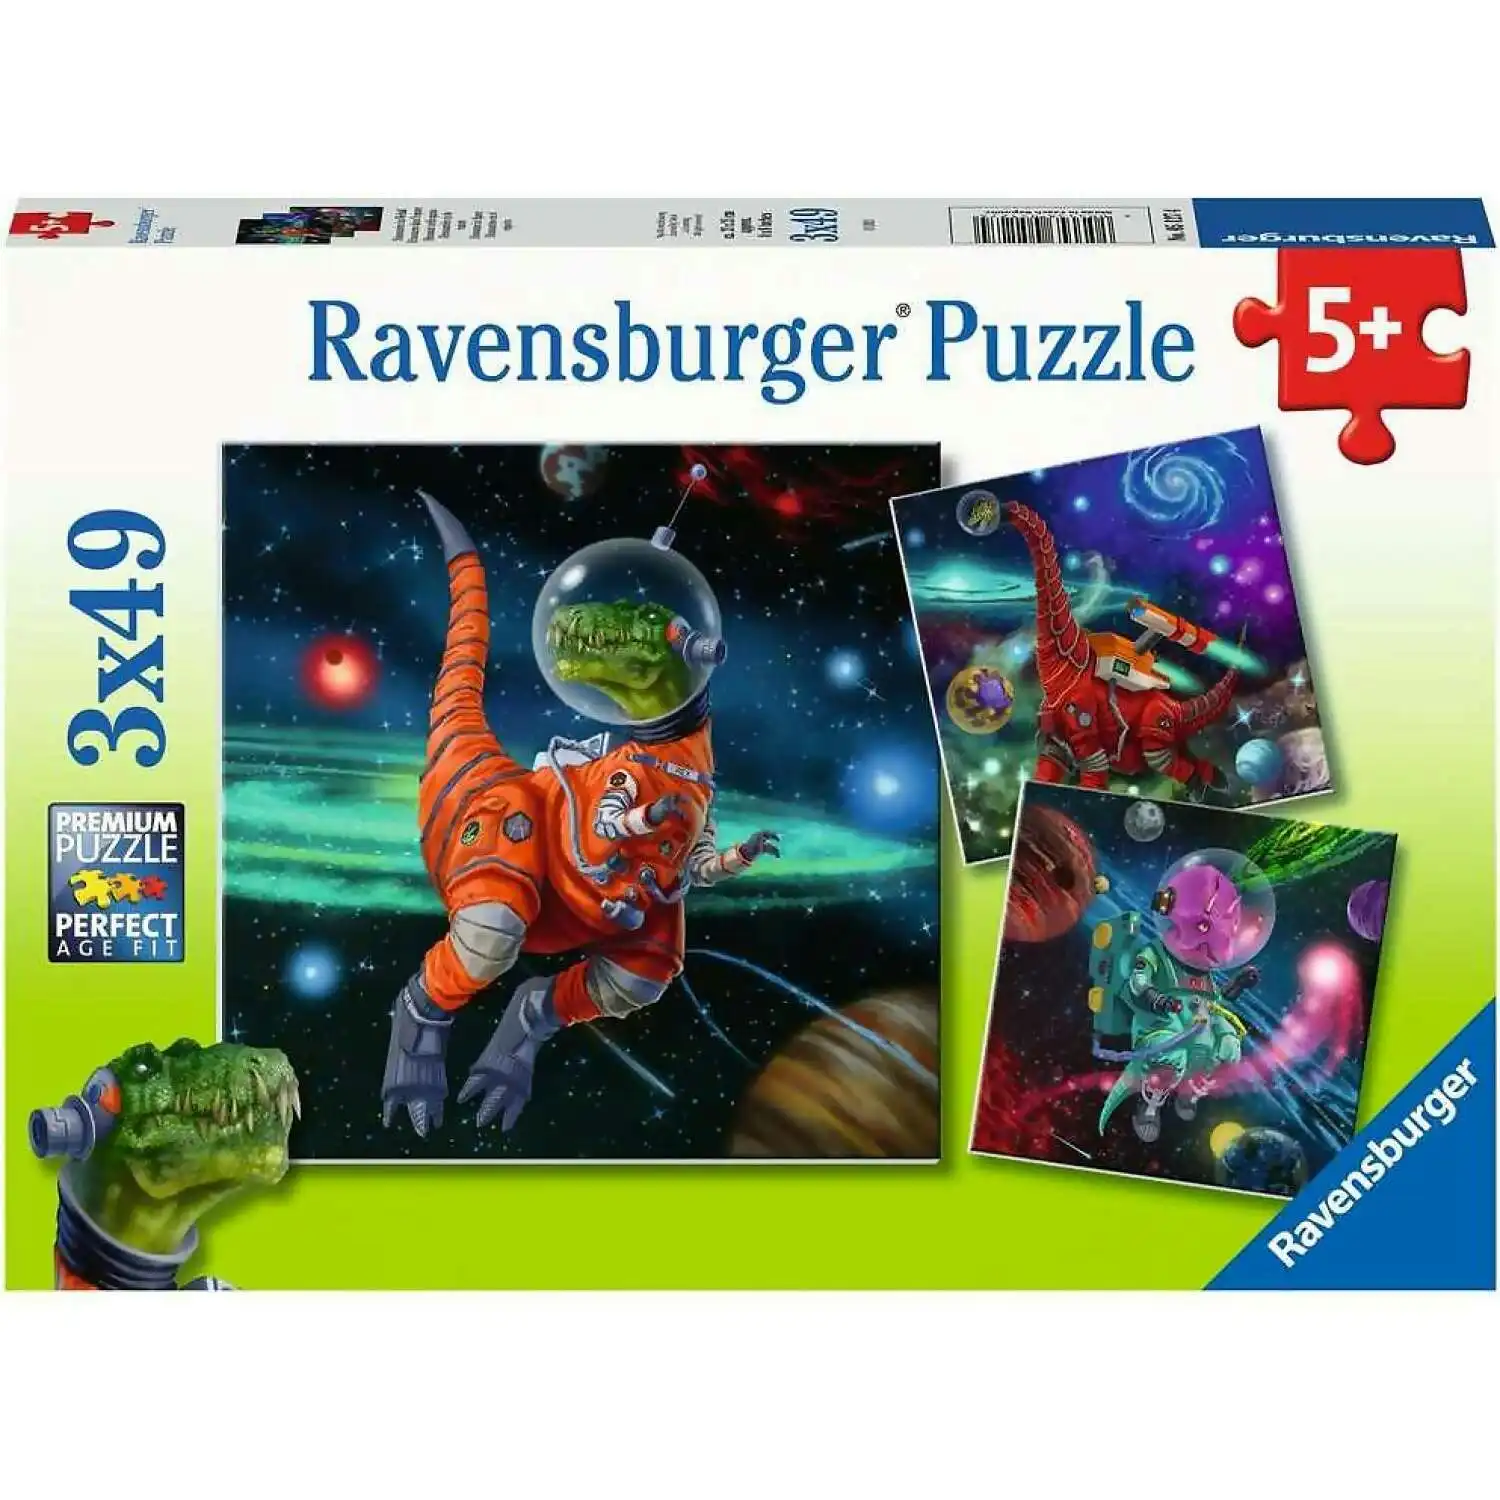 Ravensburger - Dinosaurs In Space Jigsaw Puzzle 3 x 49pc